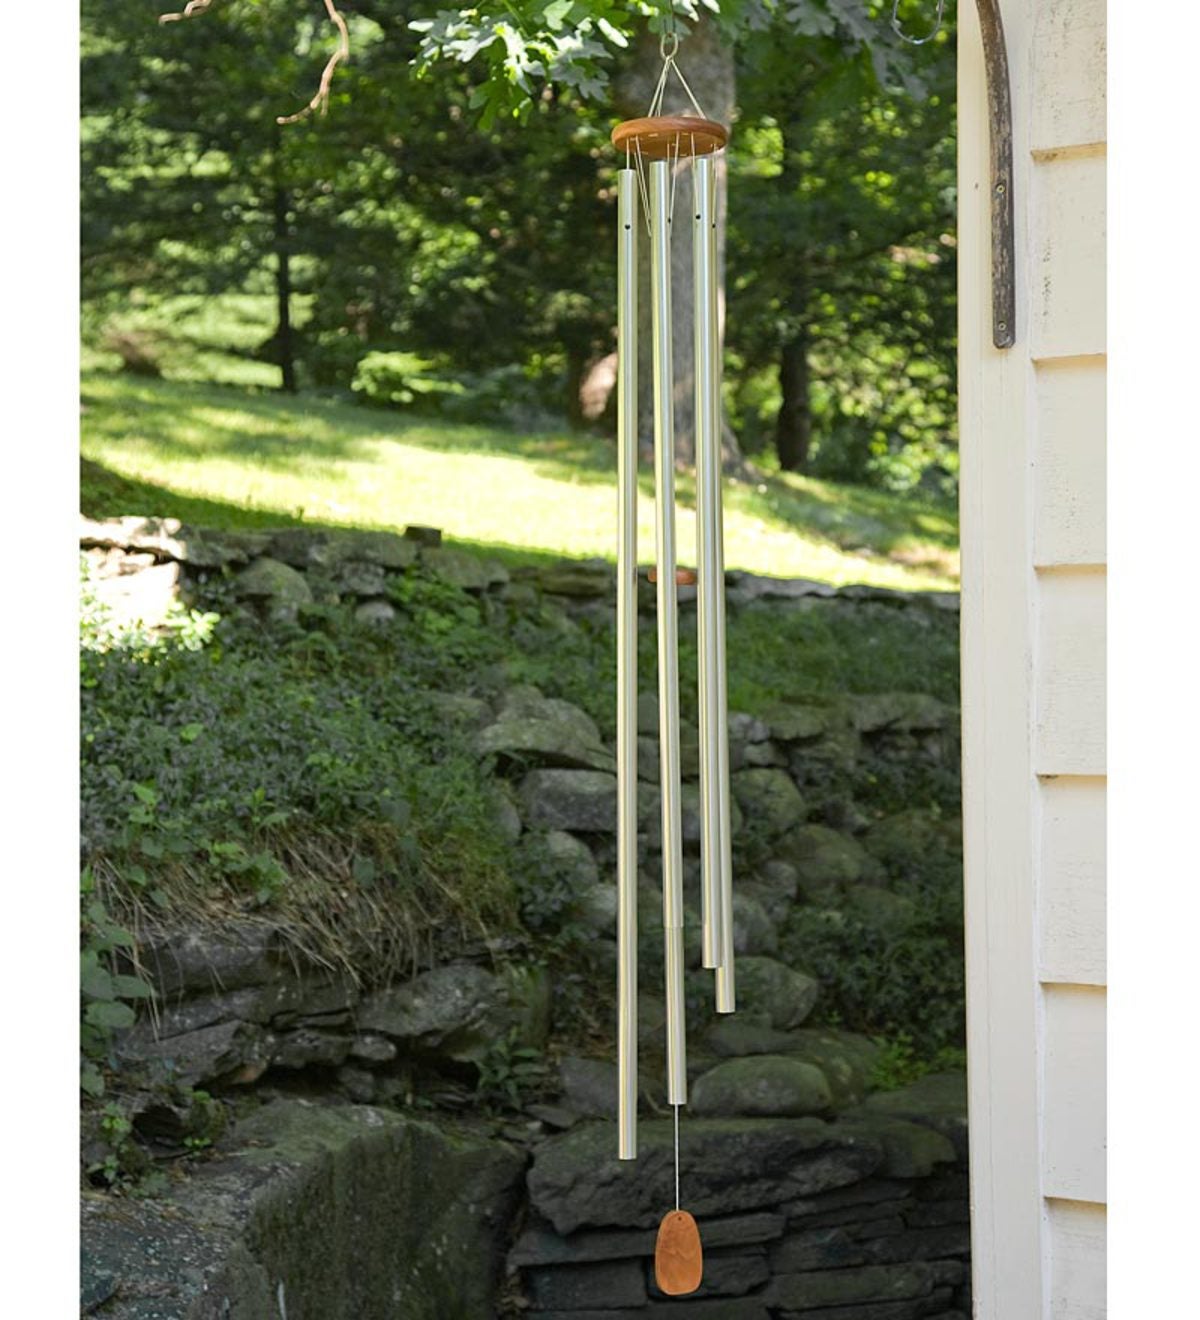 Westminster Aluminum Wind Chime